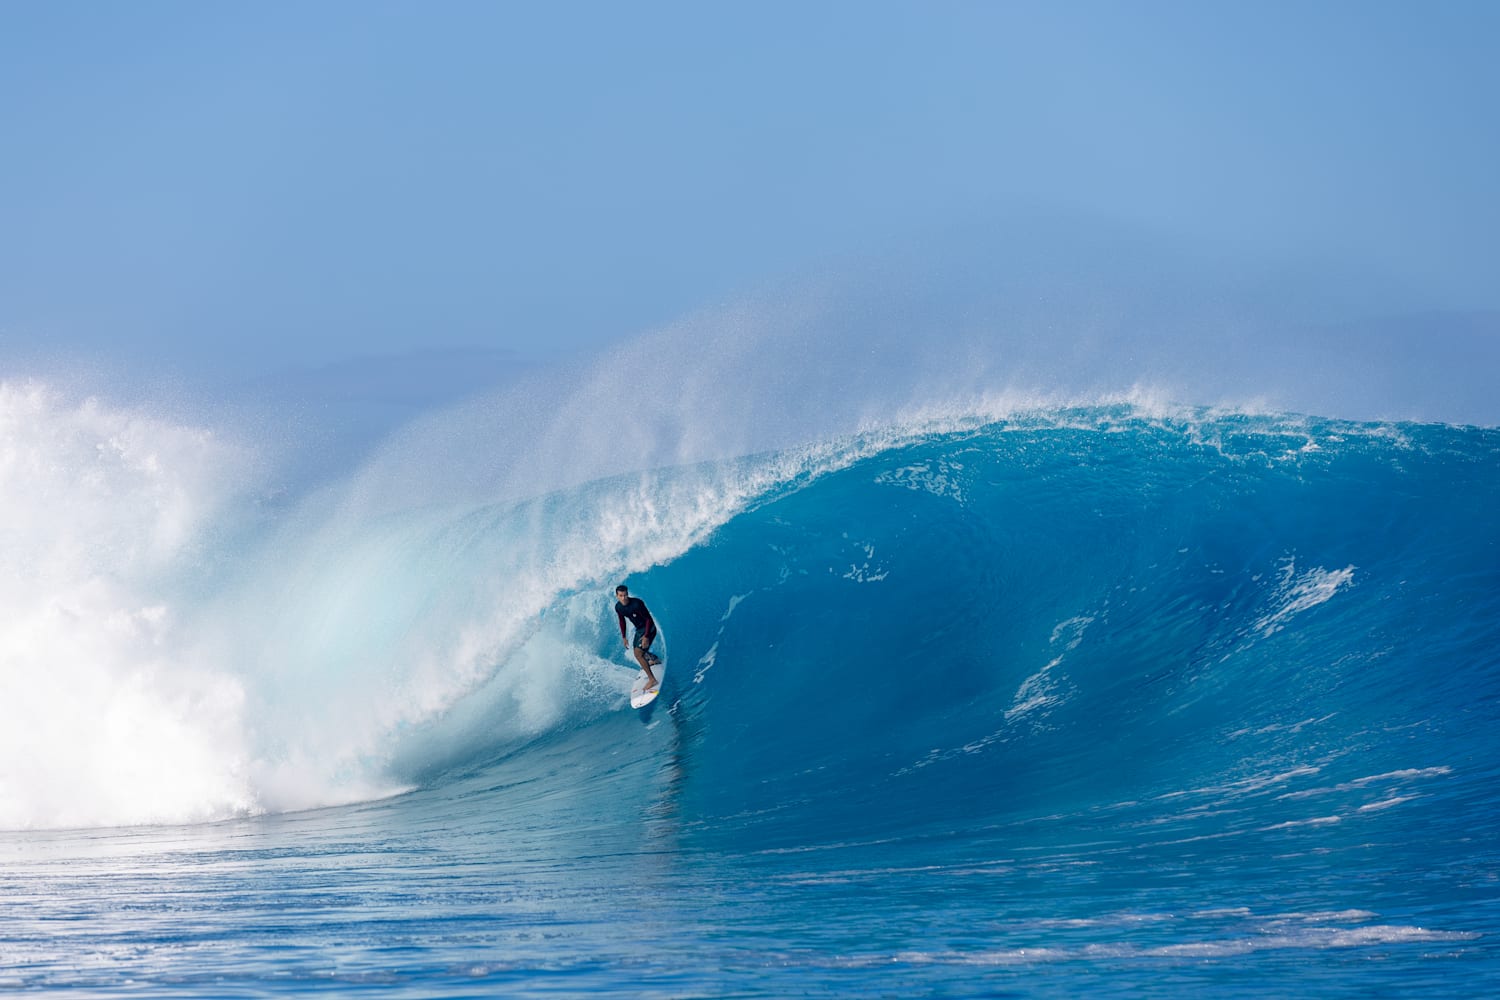 This Enormous Cloudbreak Swell Looks Too Crazy to Be Real